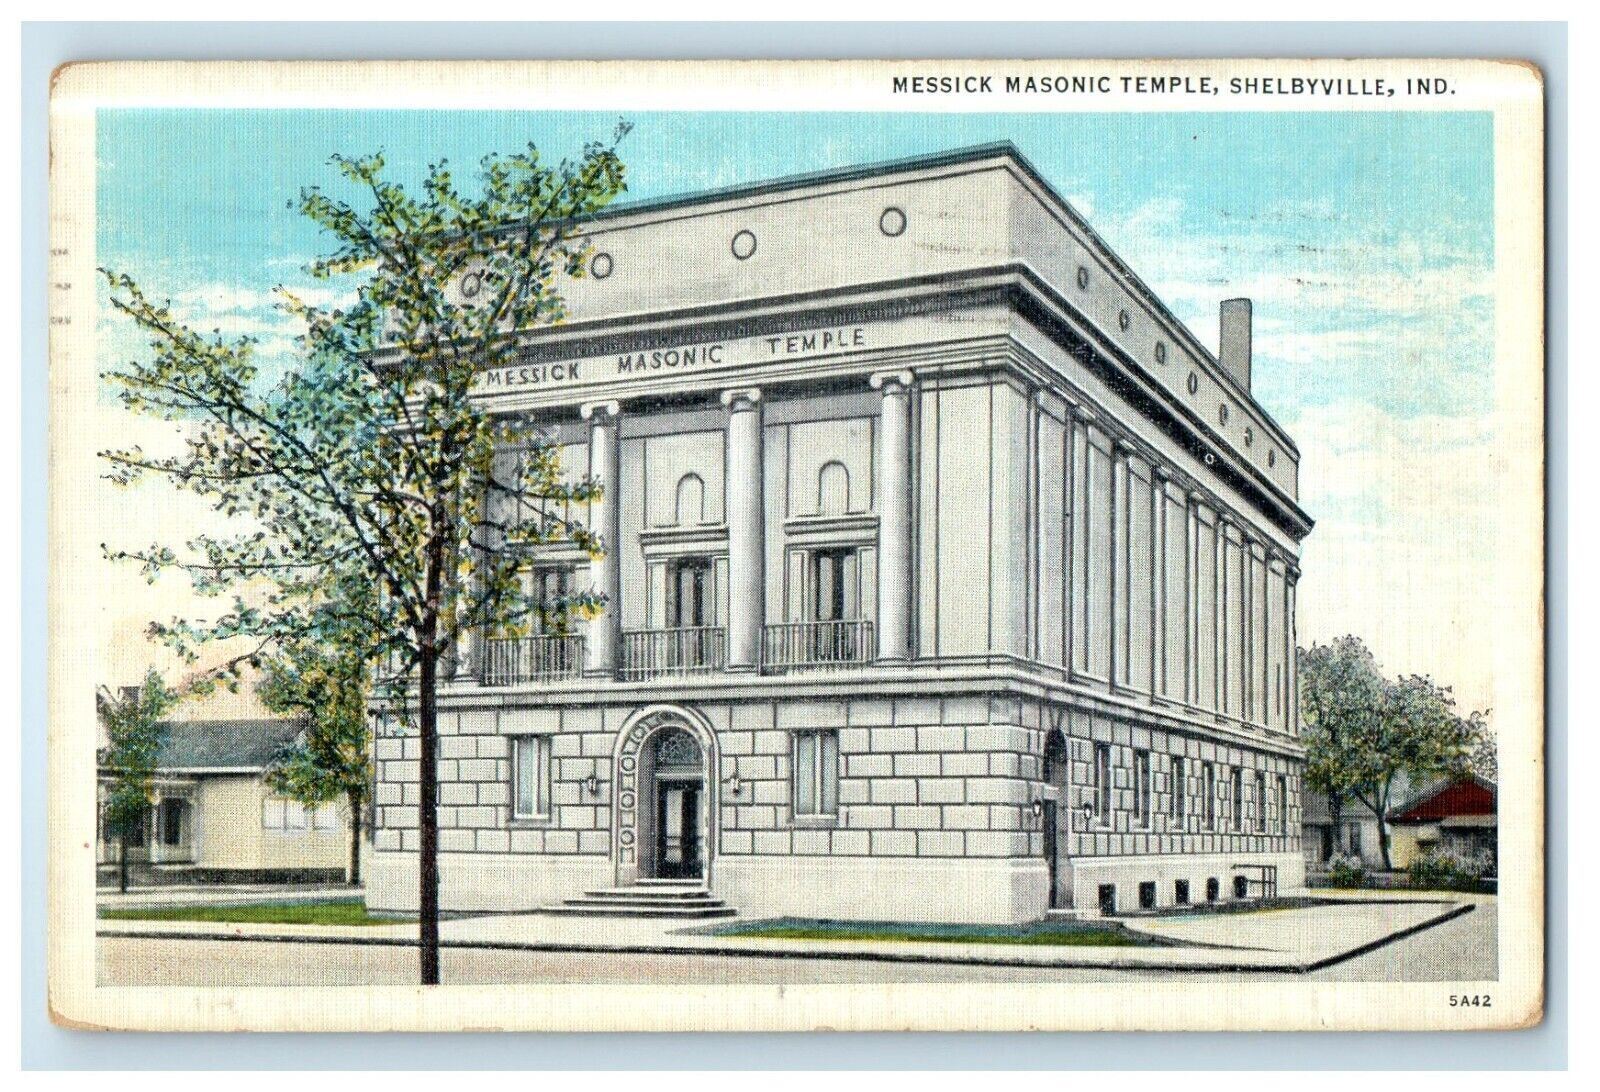 1937 Messick Masonic Temple Shelbyville Indiana IN Posted Vintage Postcard